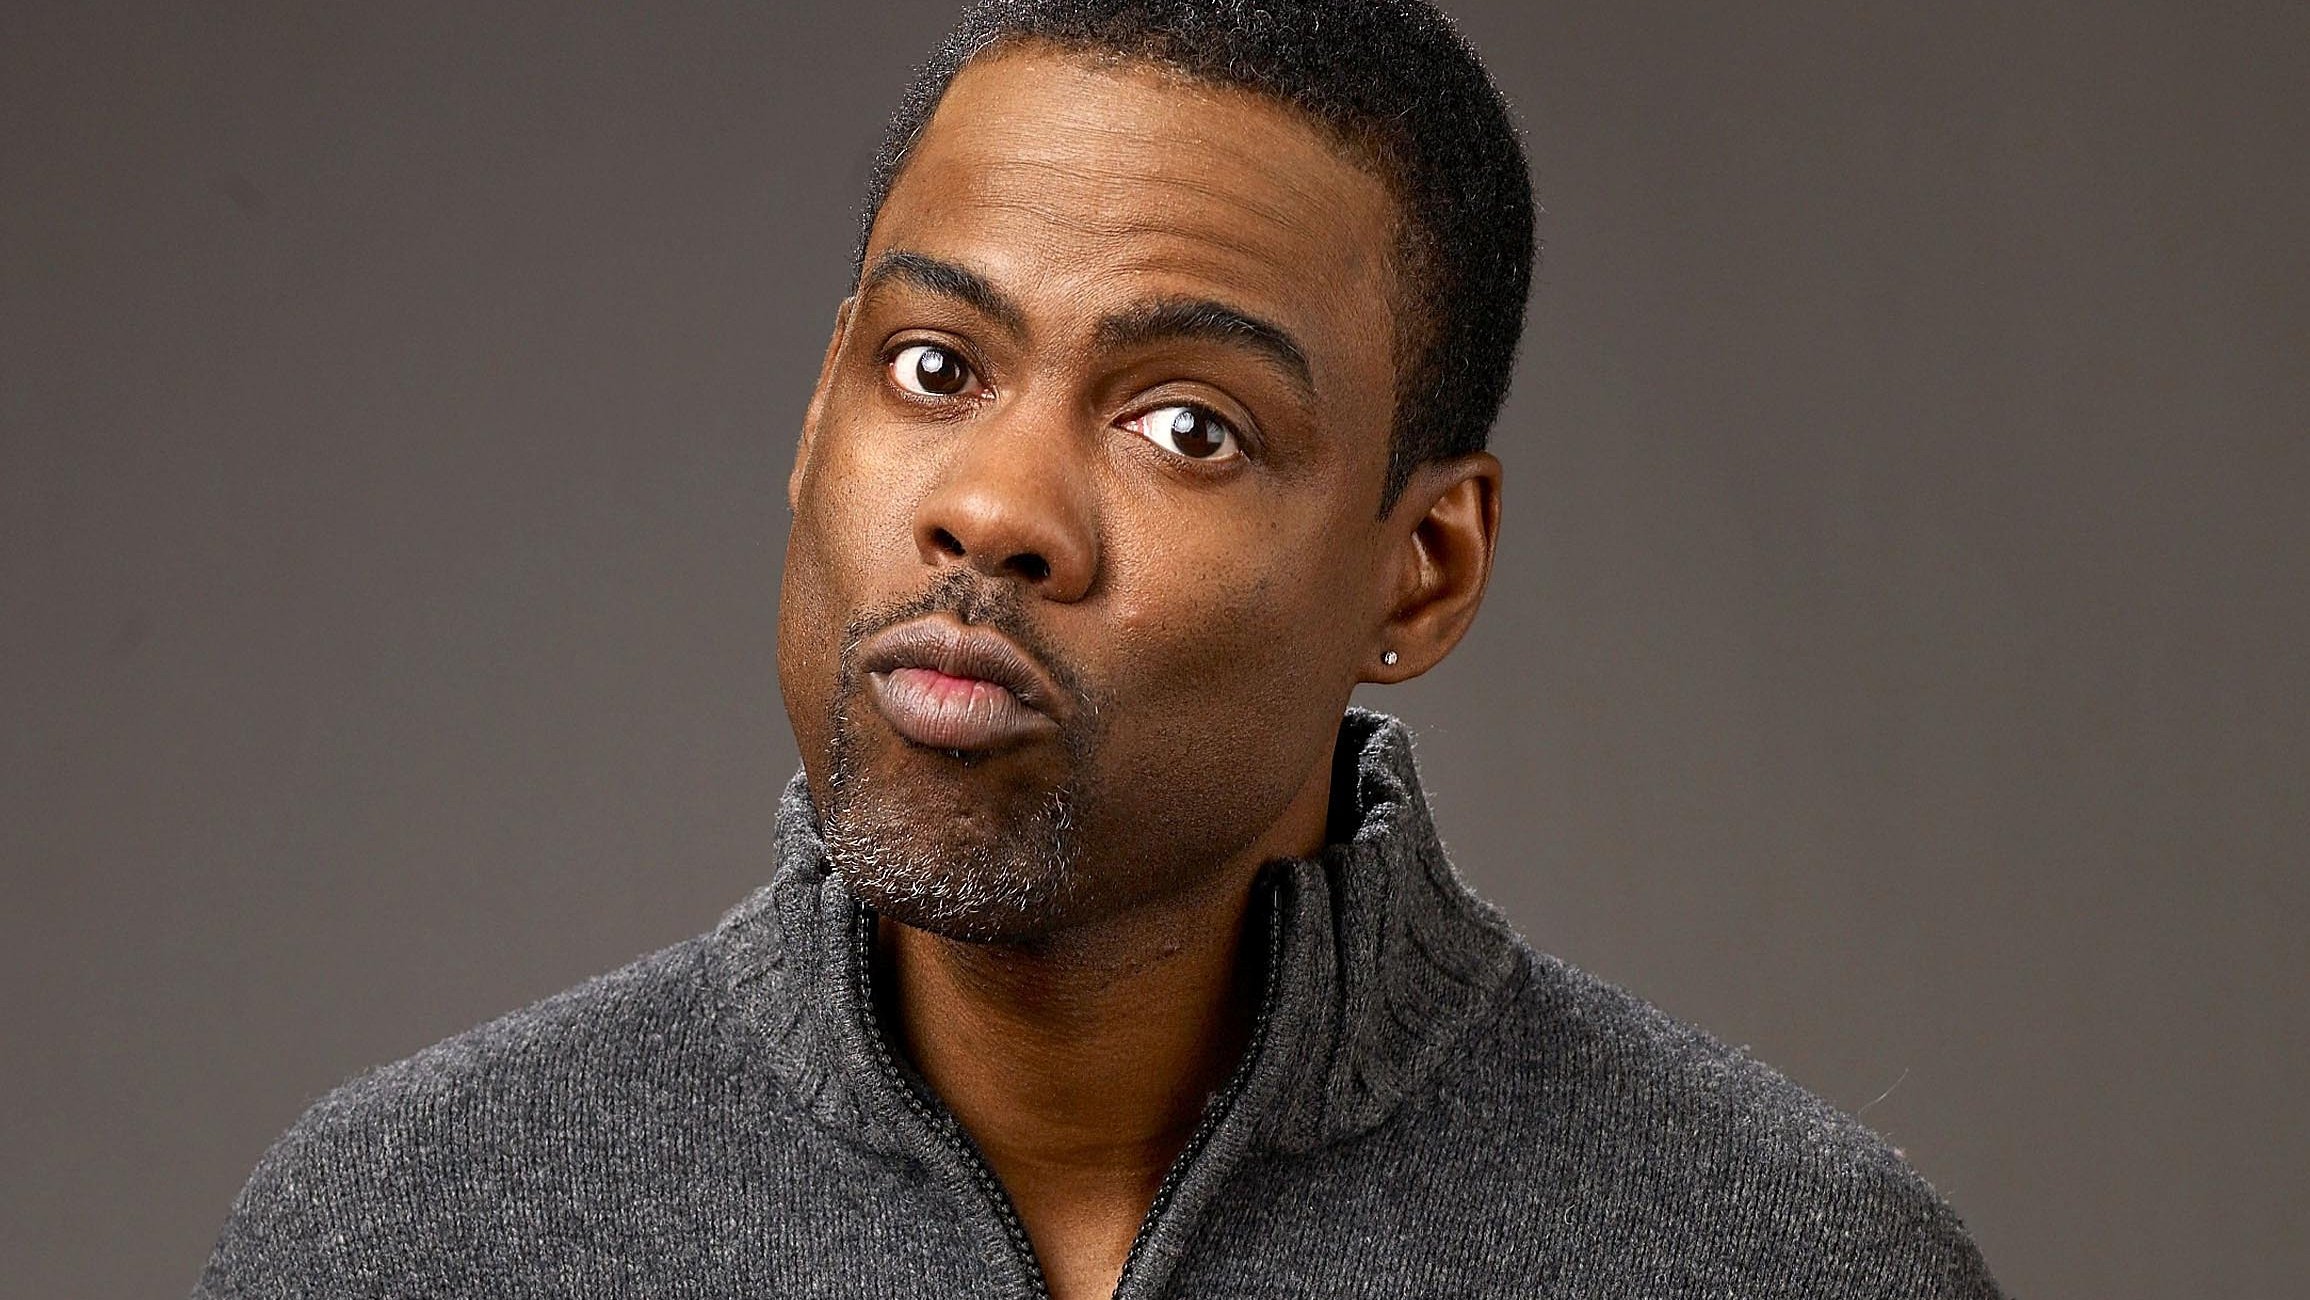 Chris Rock Wallpaper Image Photo Picture Background